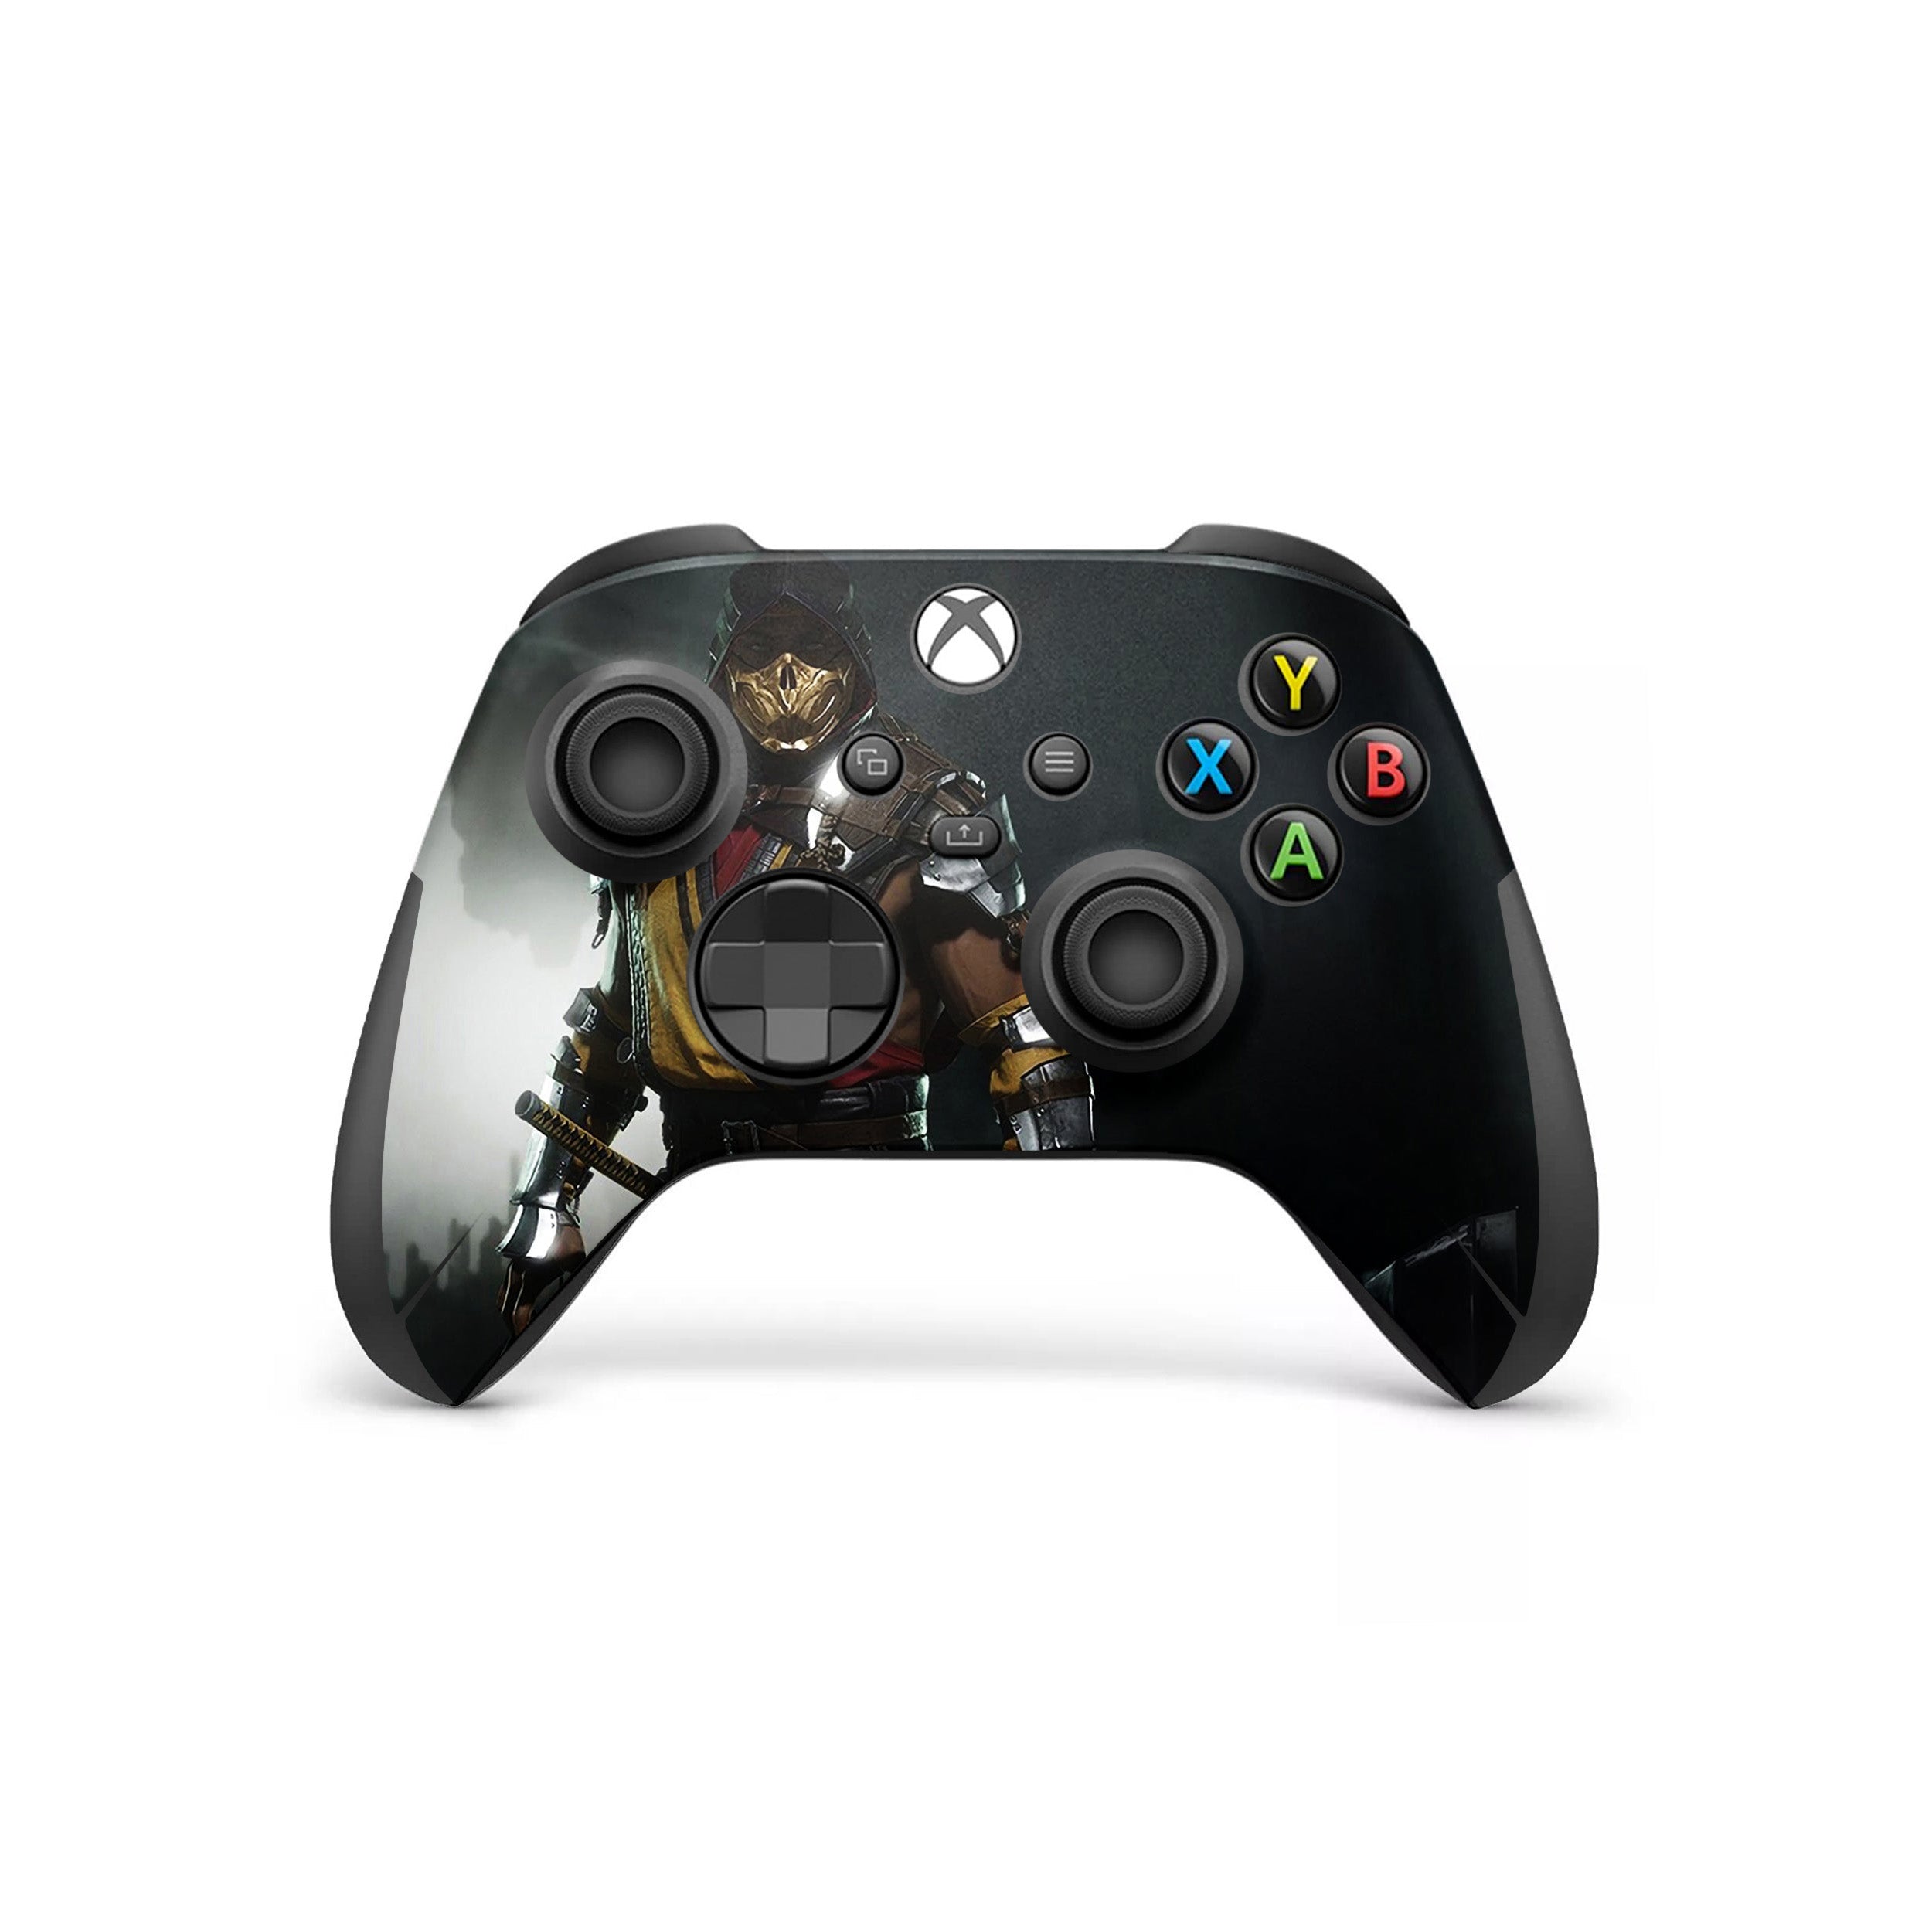 A video game skin featuring a Mortal Kombat 11 Raiden design for the Xbox Wireless Controller.